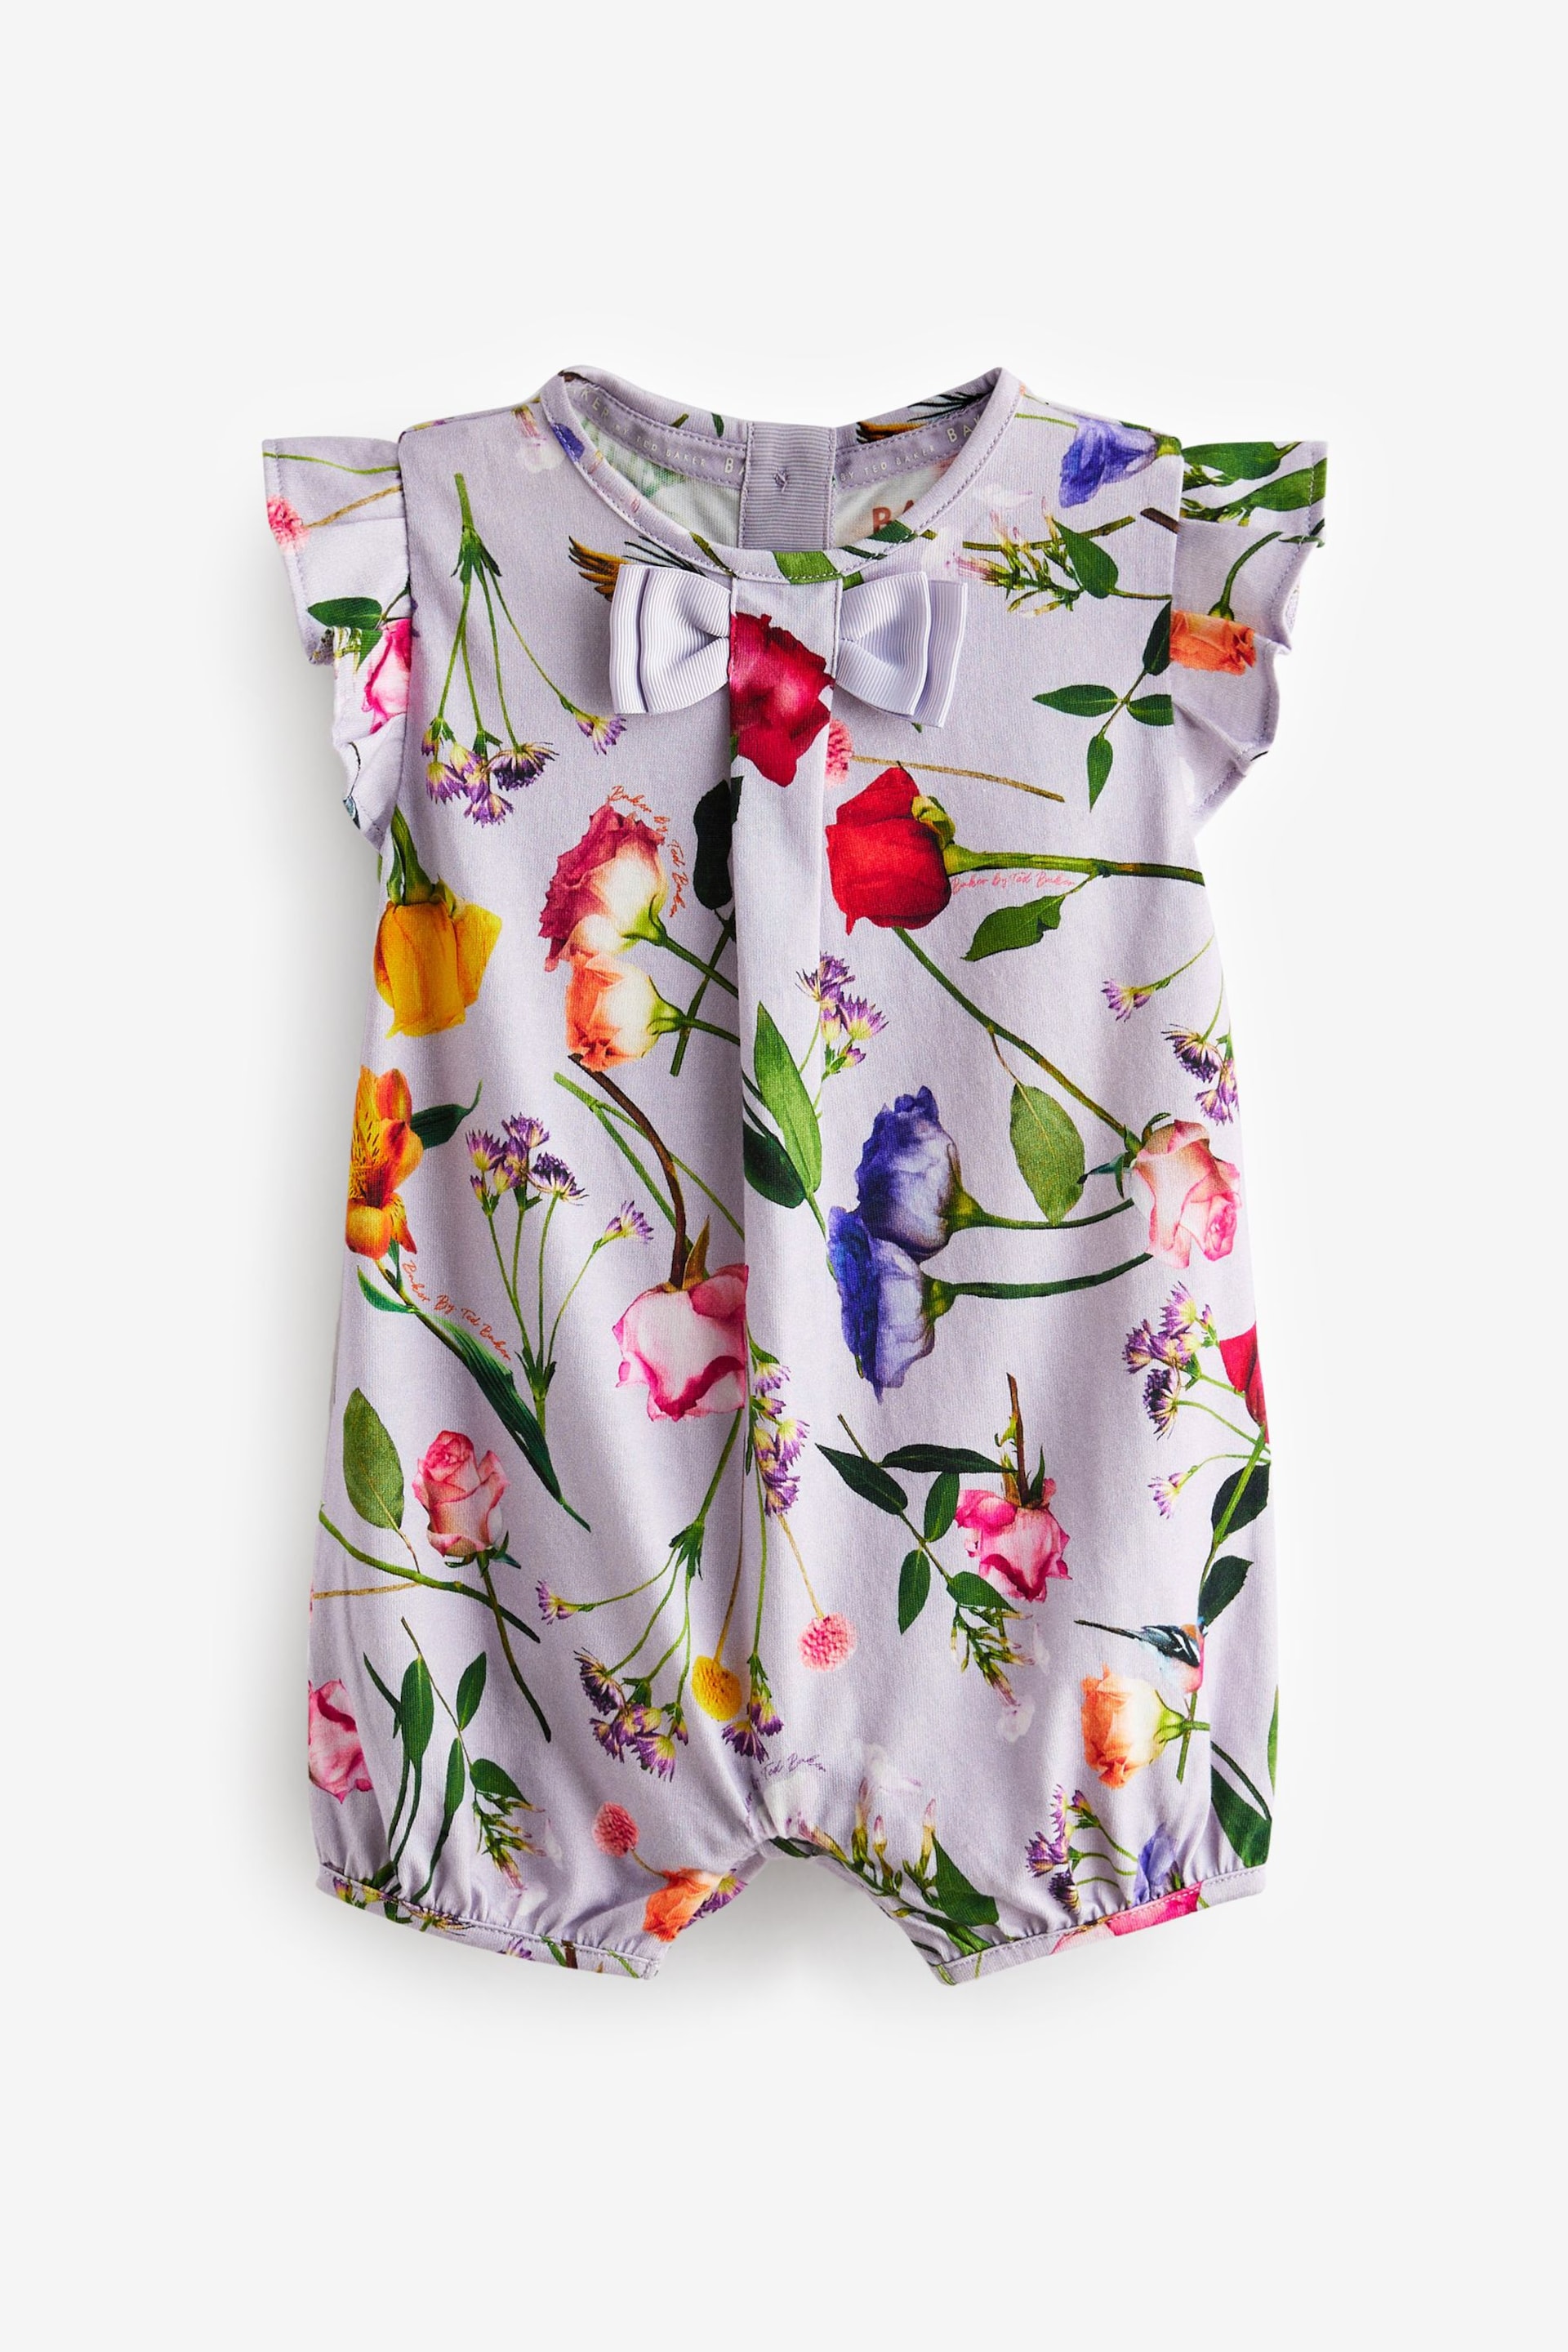 Baker by Ted Baker Lilac Purple Floral Romper - Image 5 of 8